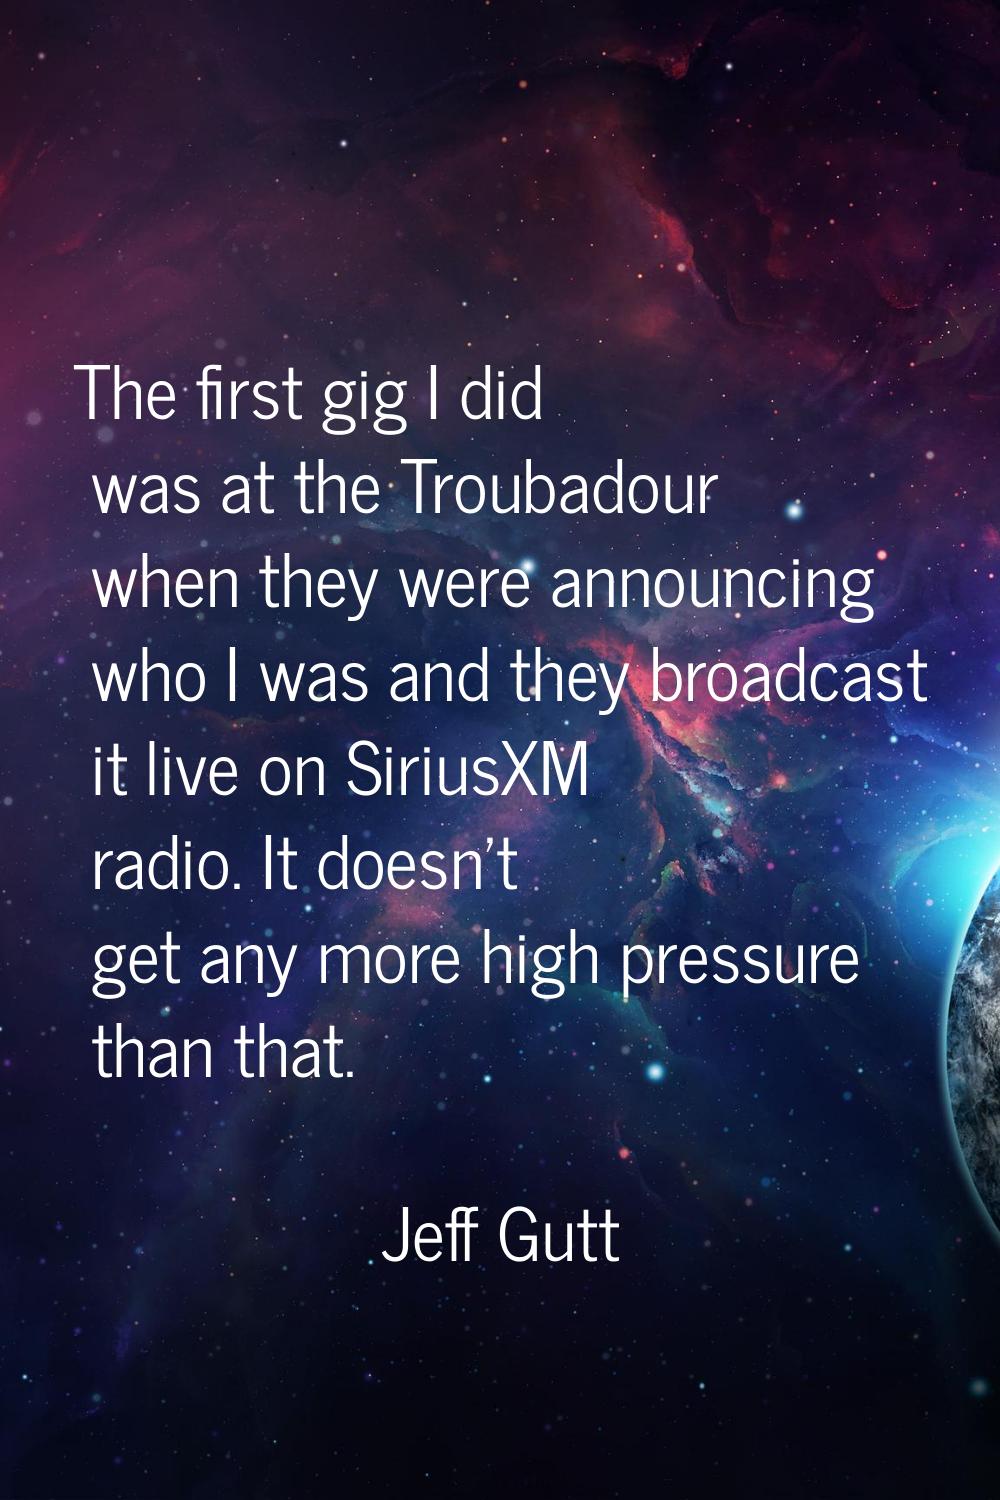 The first gig I did was at the Troubadour when they were announcing who I was and they broadcast it